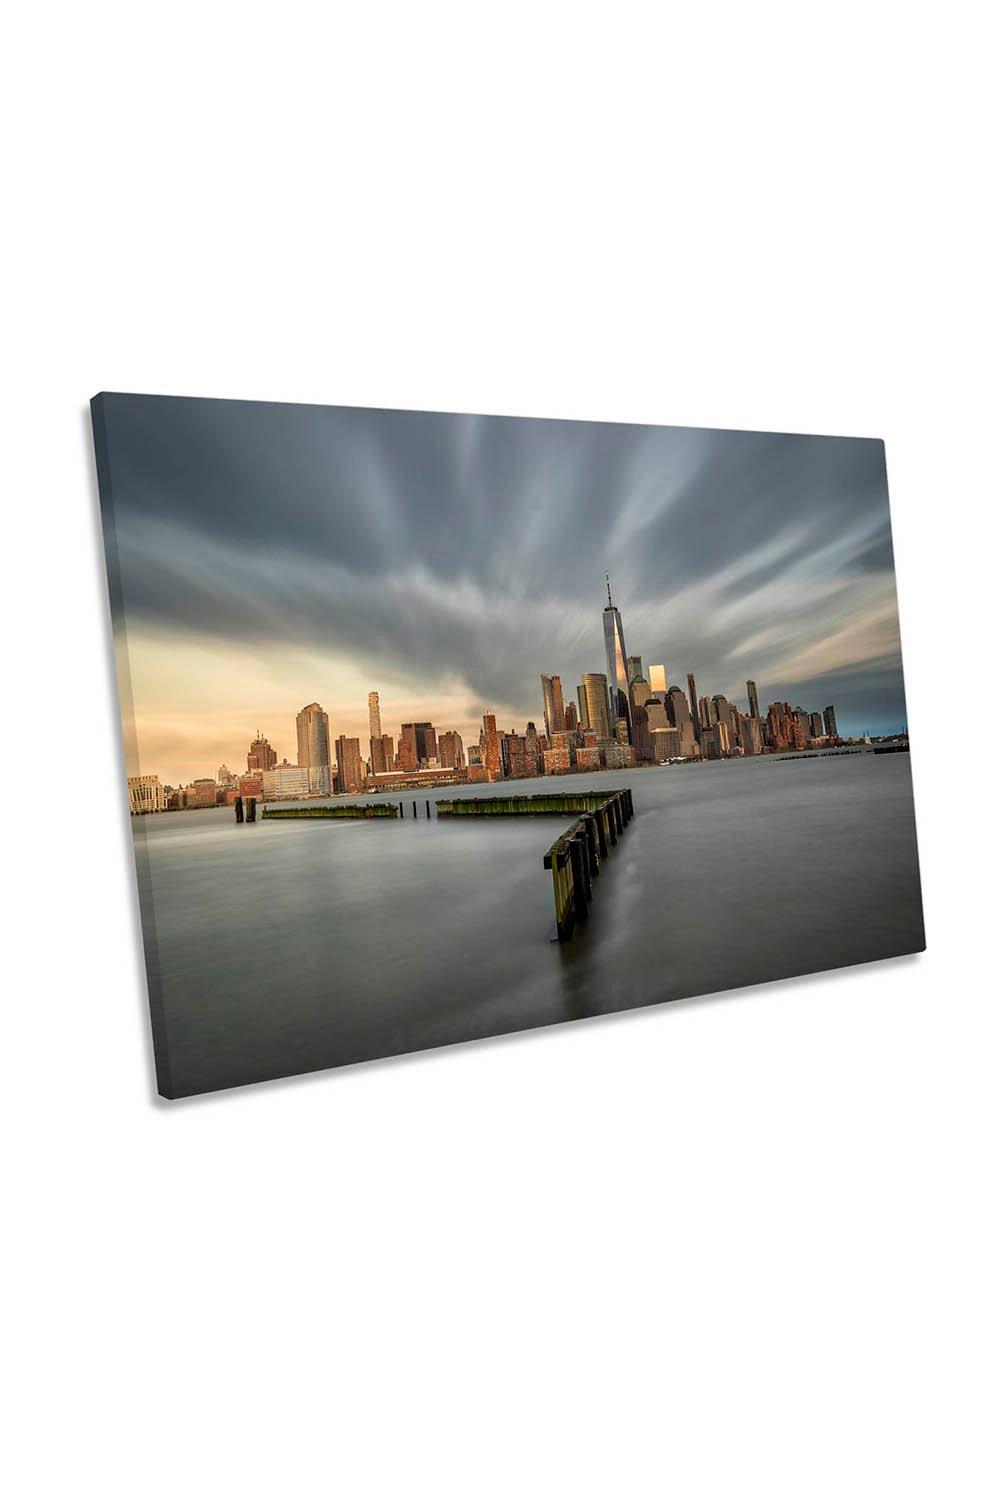 New York City Skyscrapers River Hudson Canvas Wall Art Picture Print